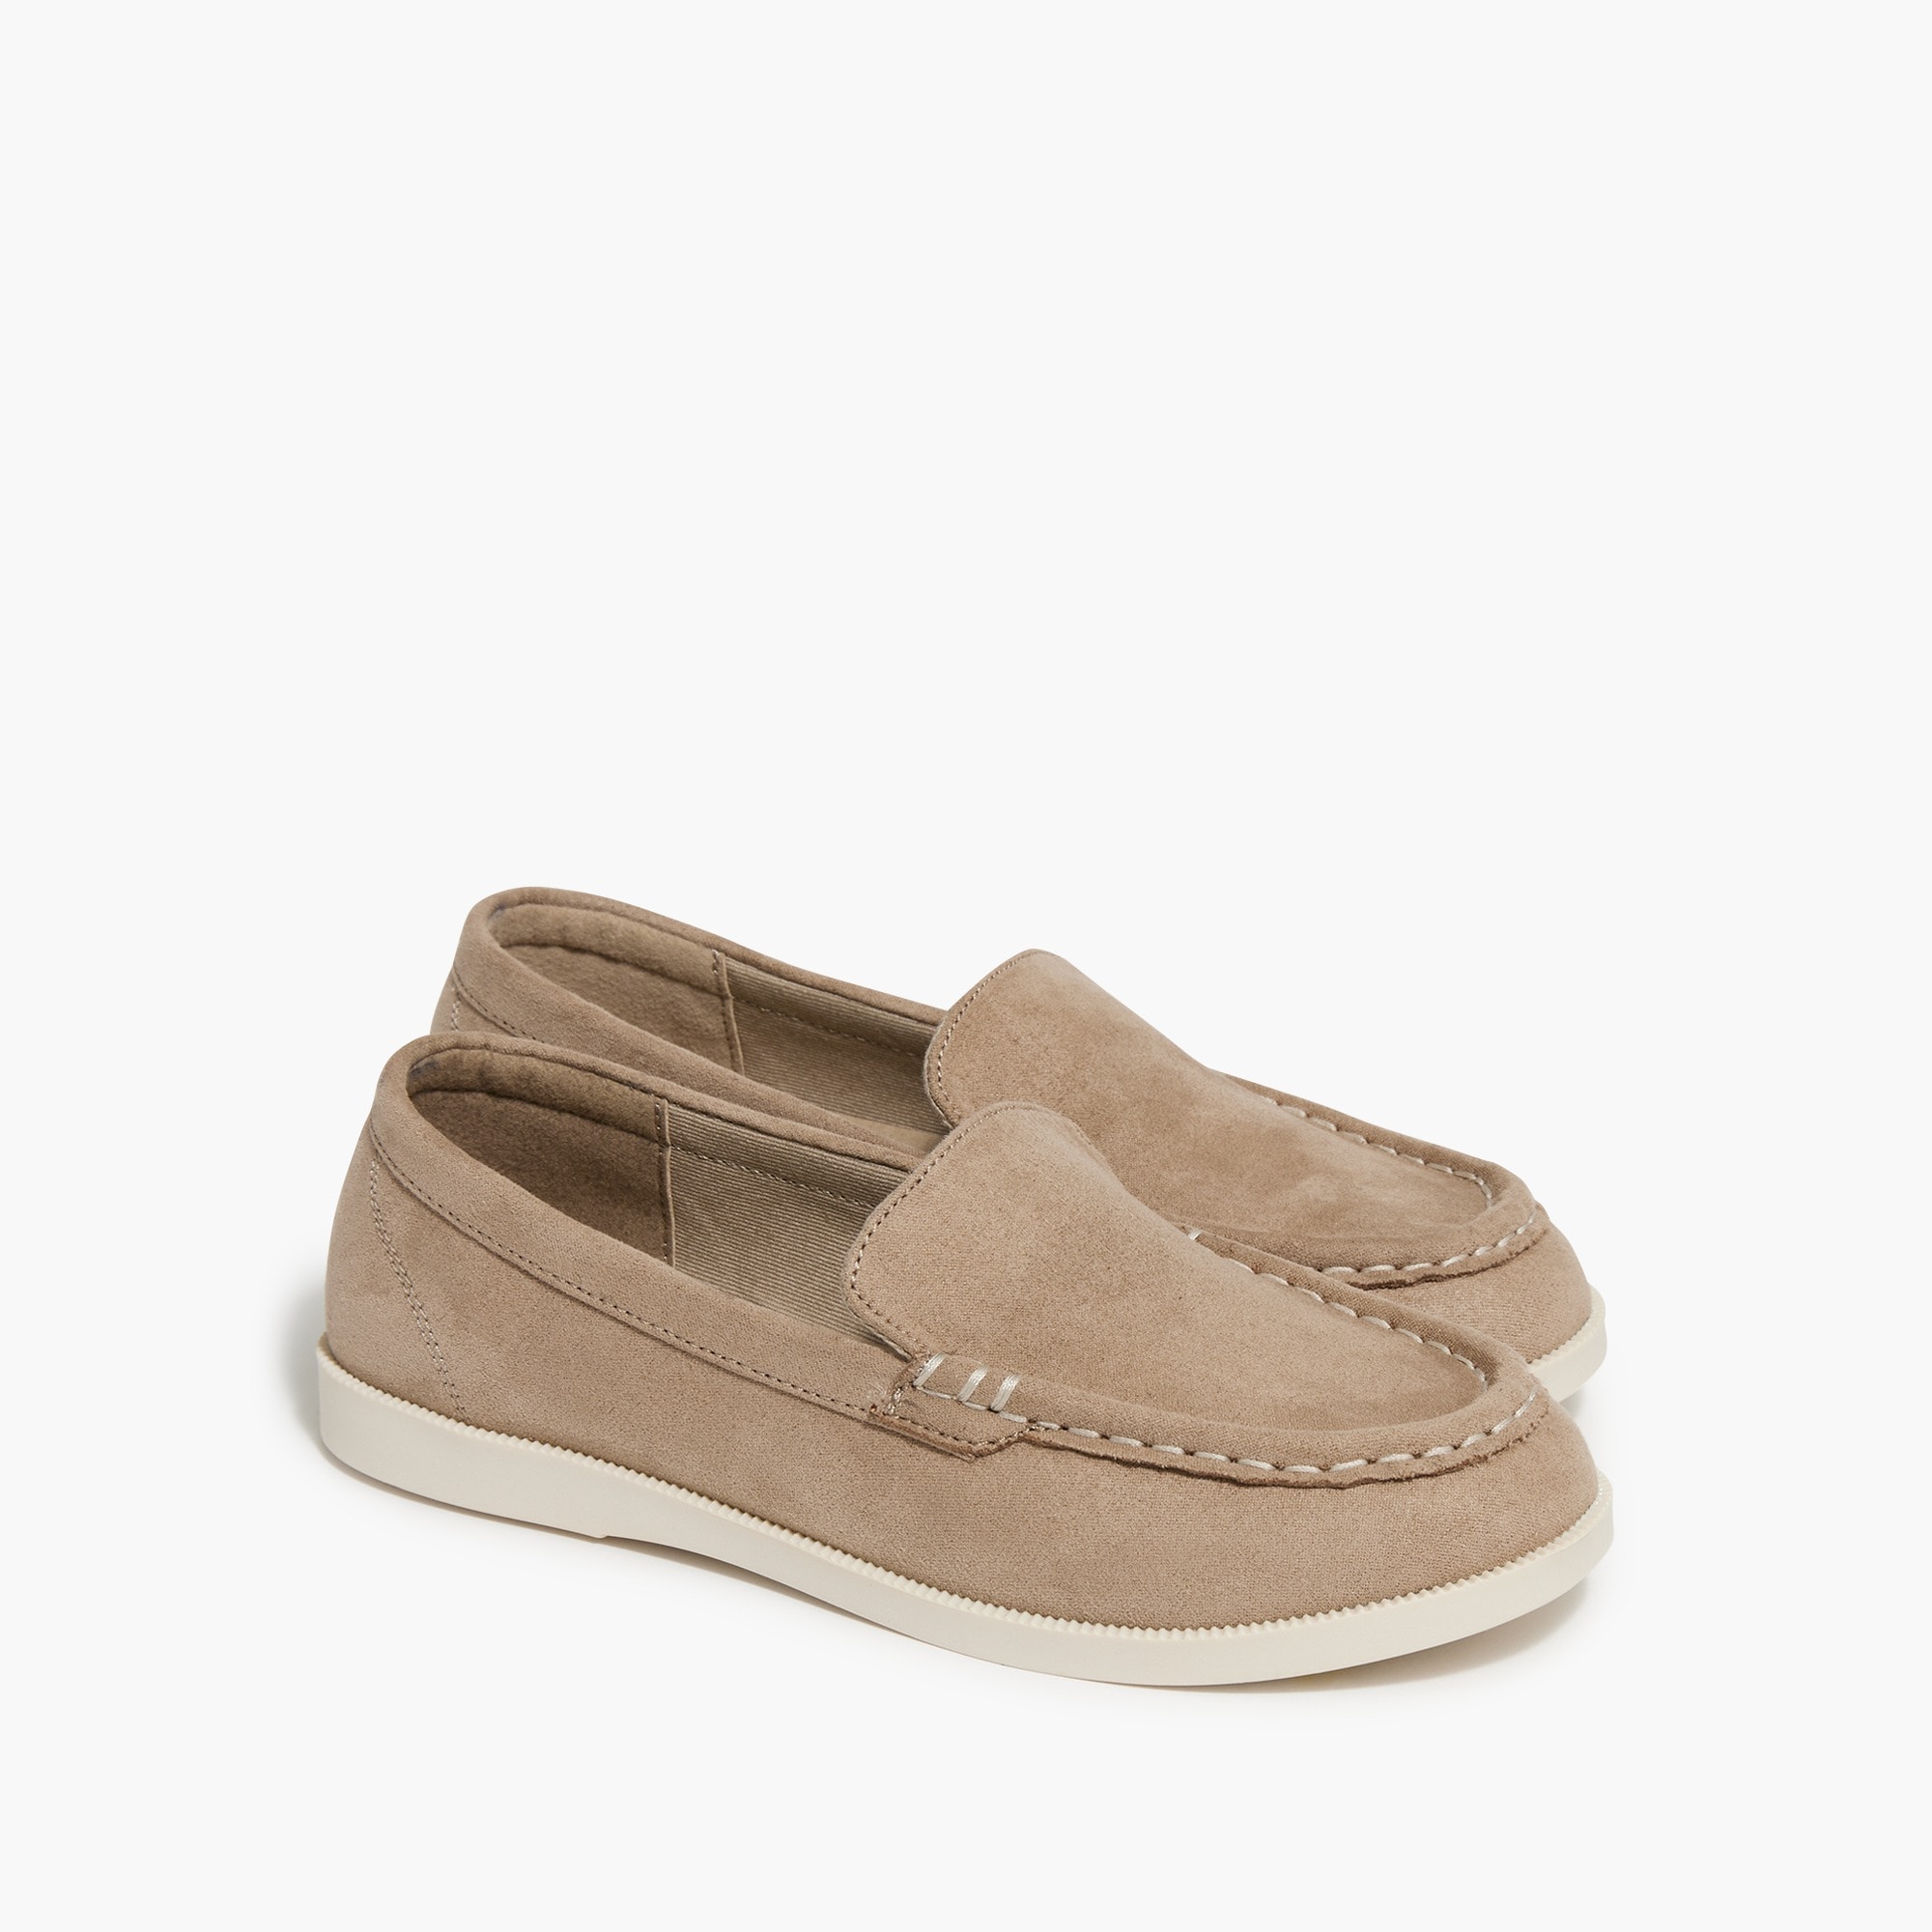  Boys' sueded loafers